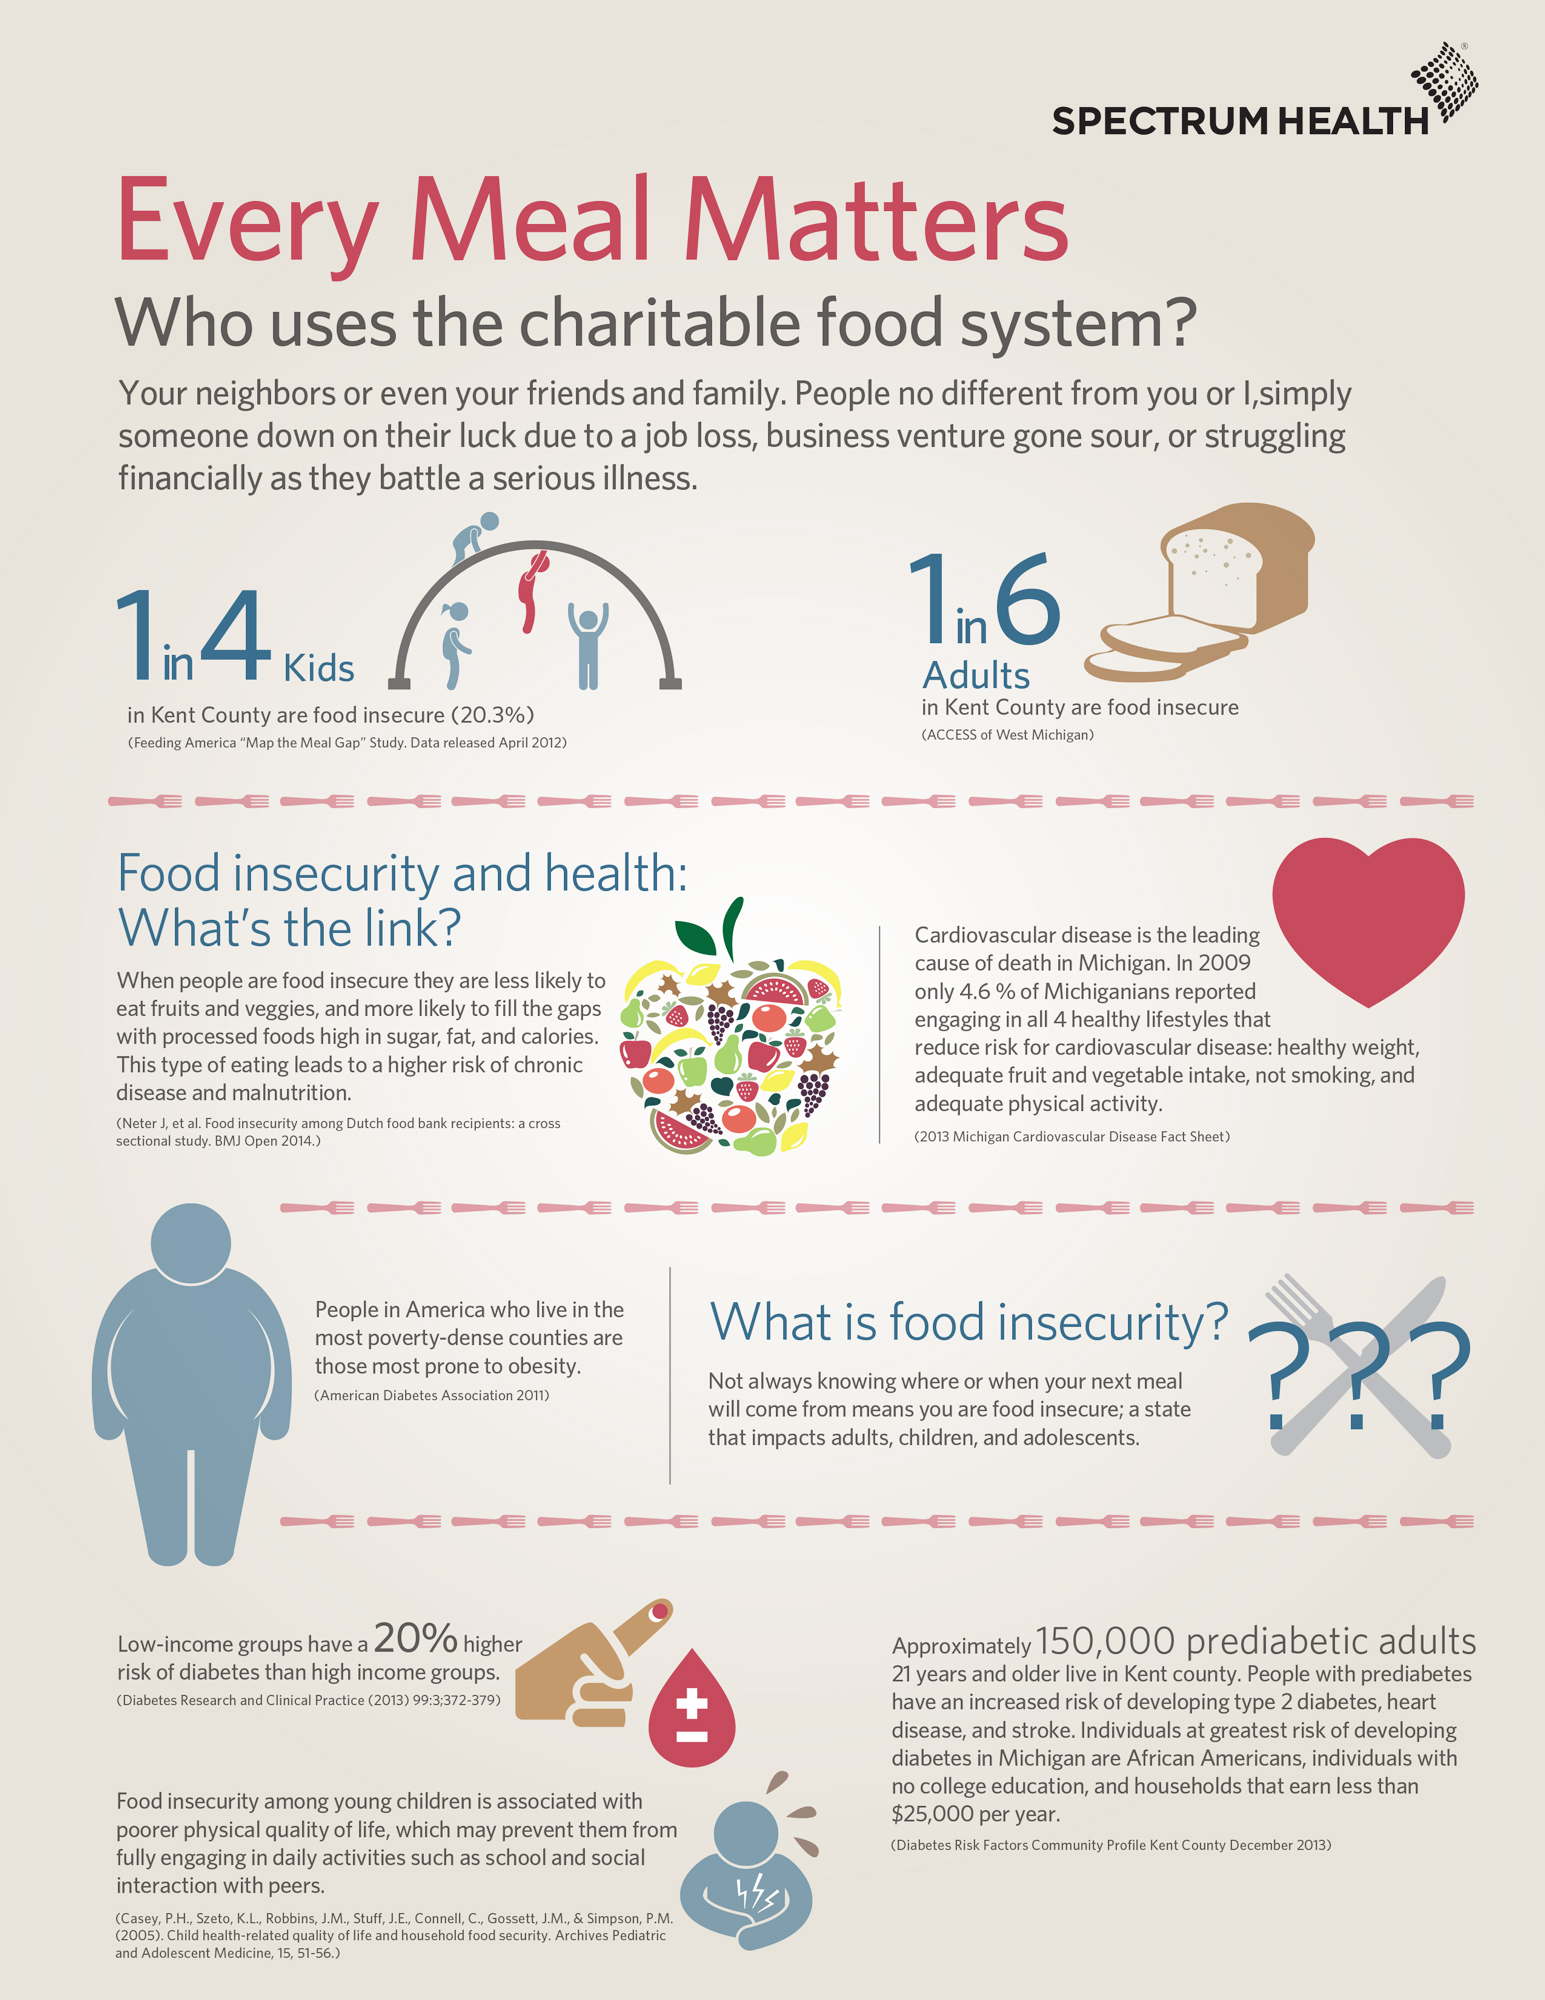 importance of healthy food donations